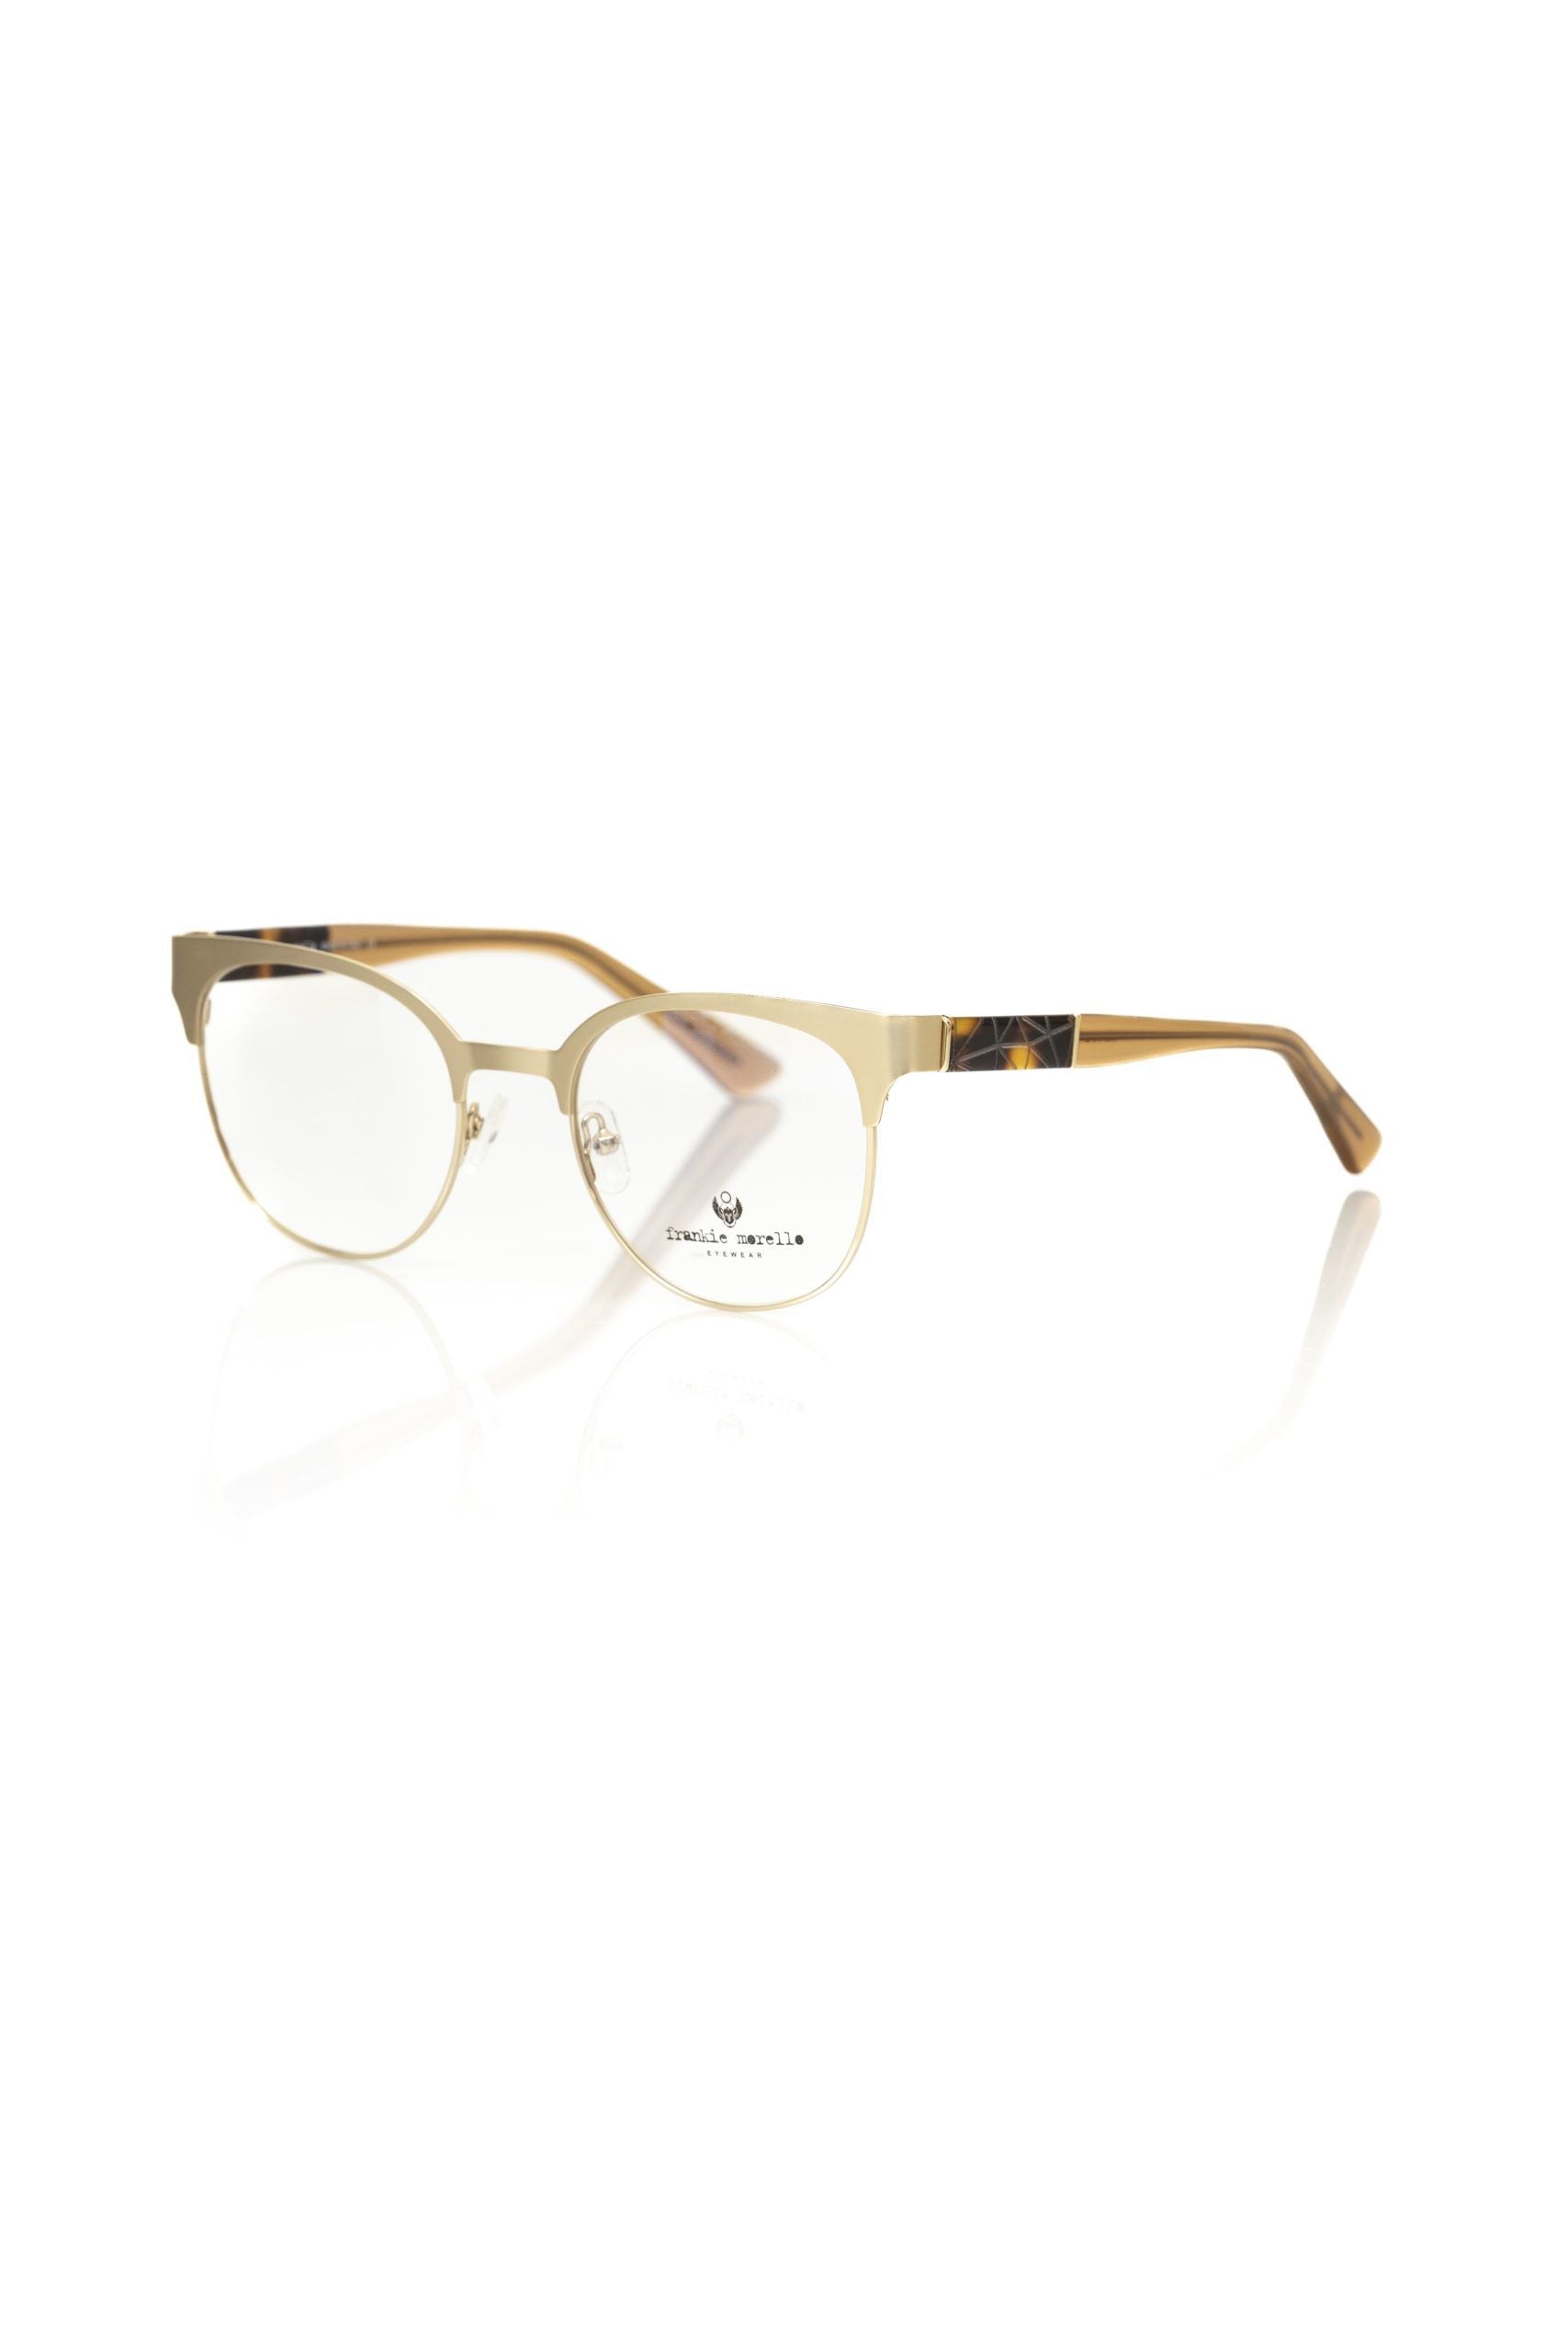 Frankie Morello FRMO-22119 Gold Acetate Frames - Designed by Frankie Morello Available to Buy at a Discounted Price on Moon Behind The Hill Online Designer Discount Store